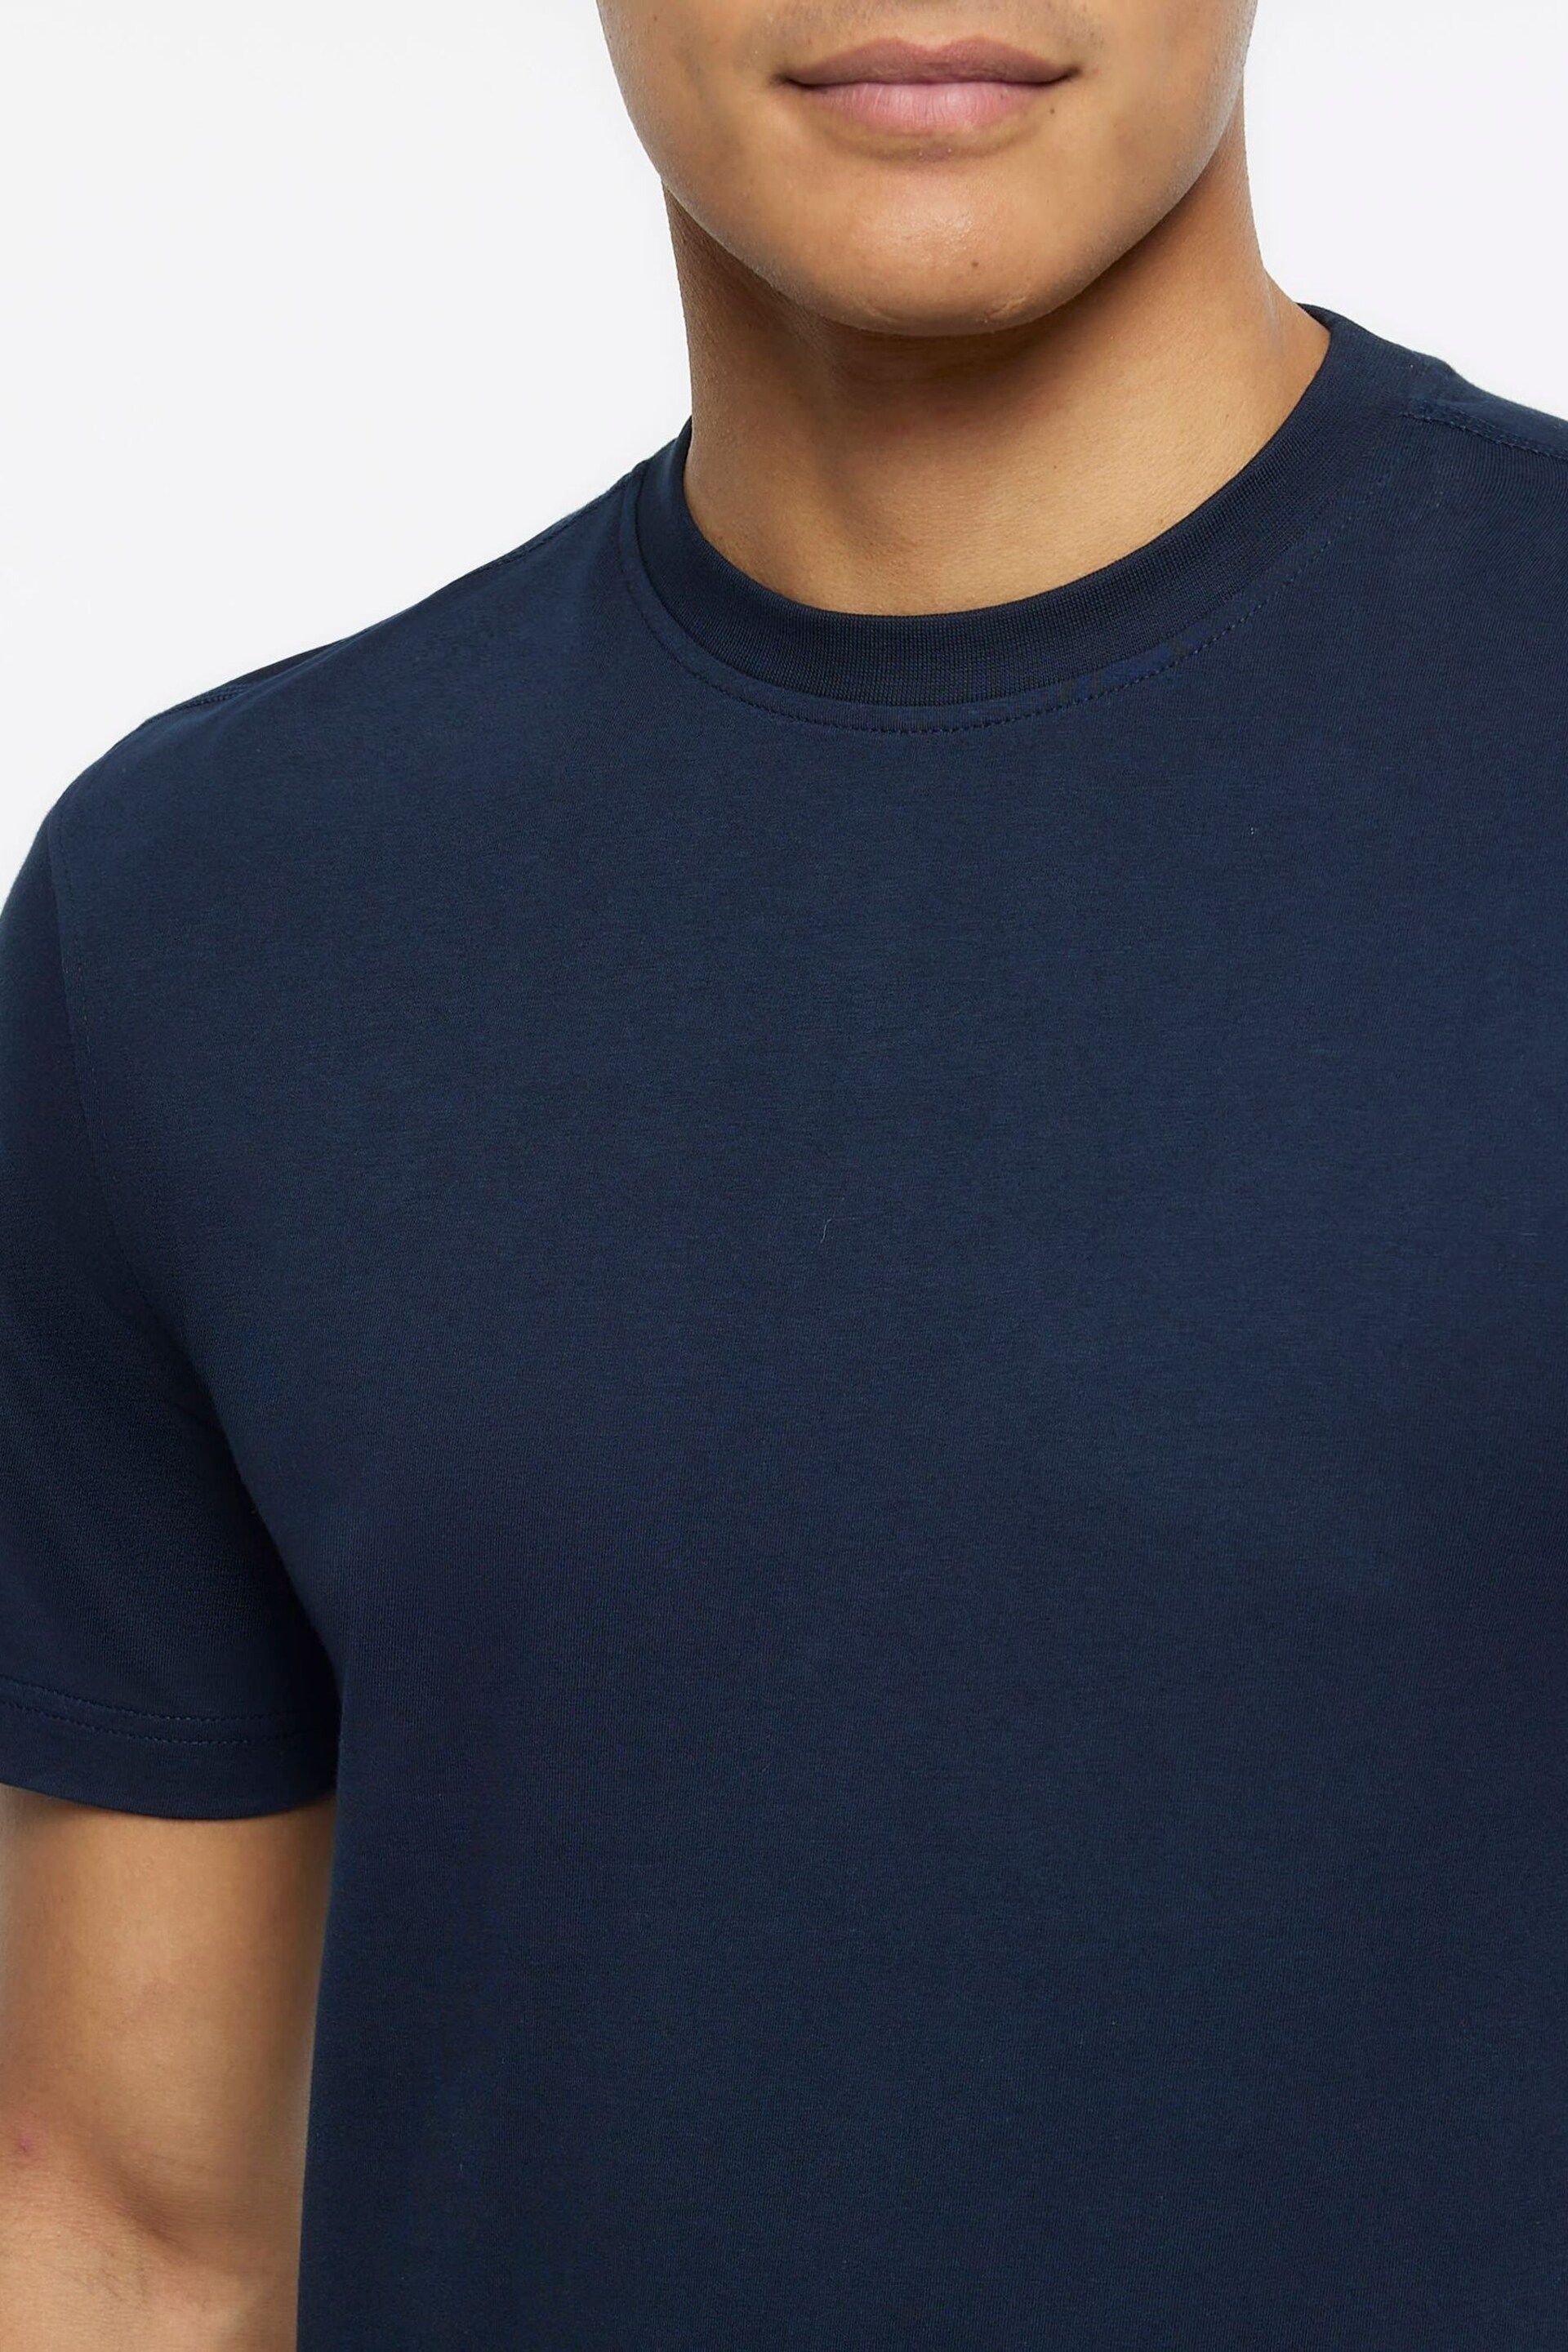 River Island Navy Blue Slim Fit T-Shirt - Image 3 of 4